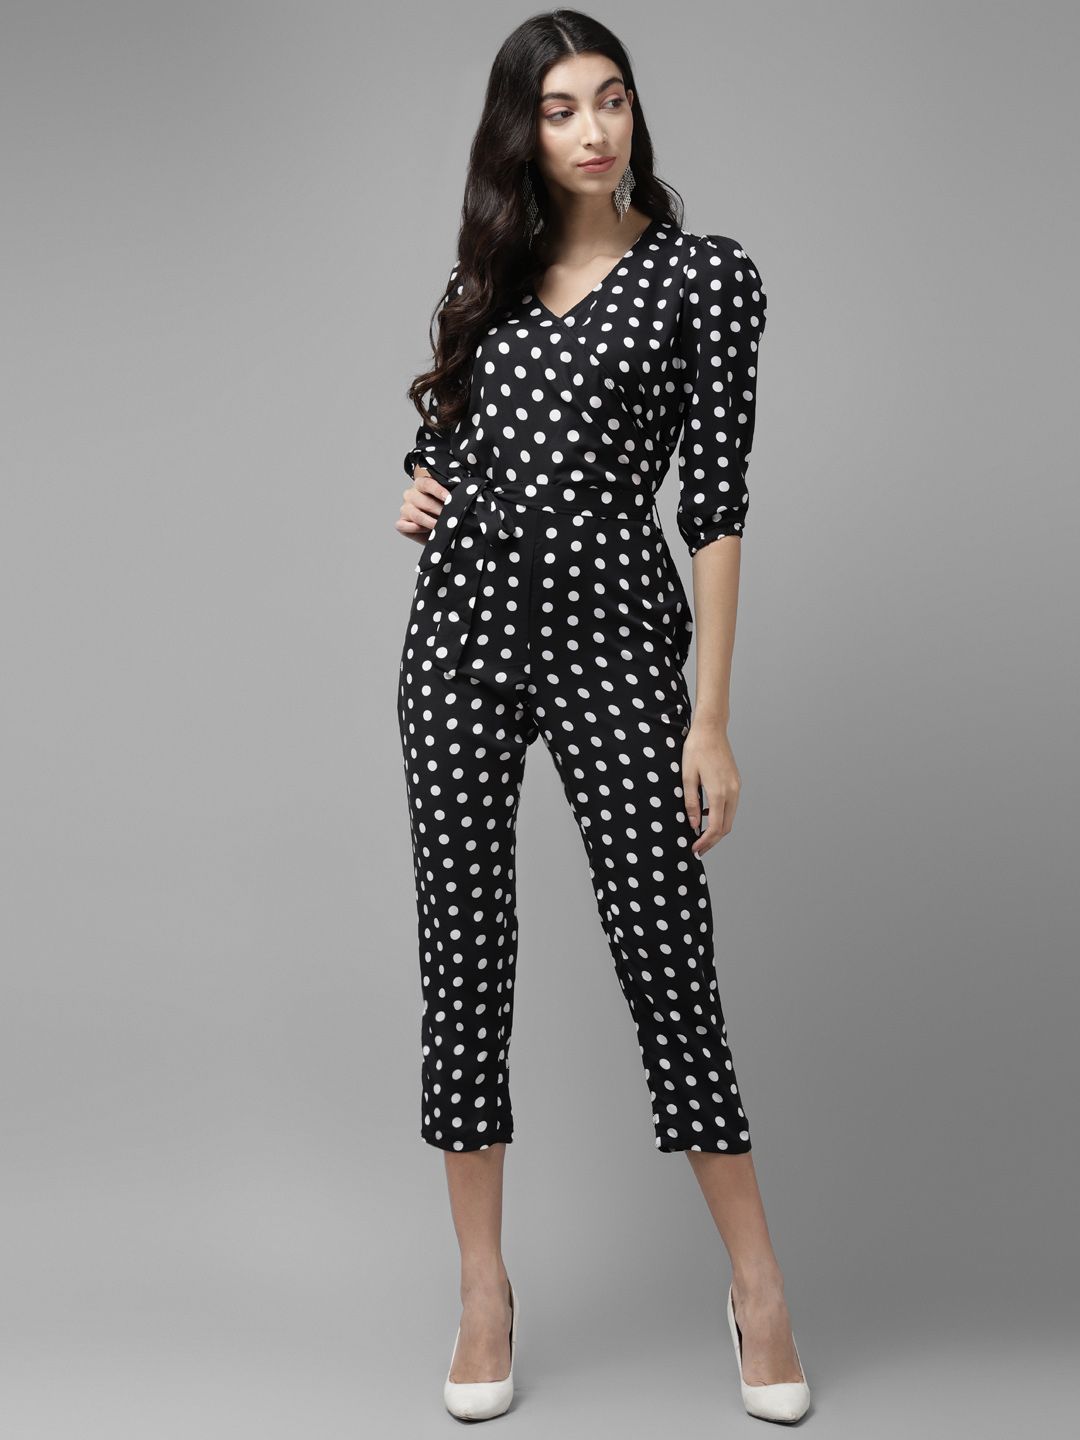 Cayman Women Black & White Polka Dot Print Cropped Basic Jumpsuit With Belt Price in India